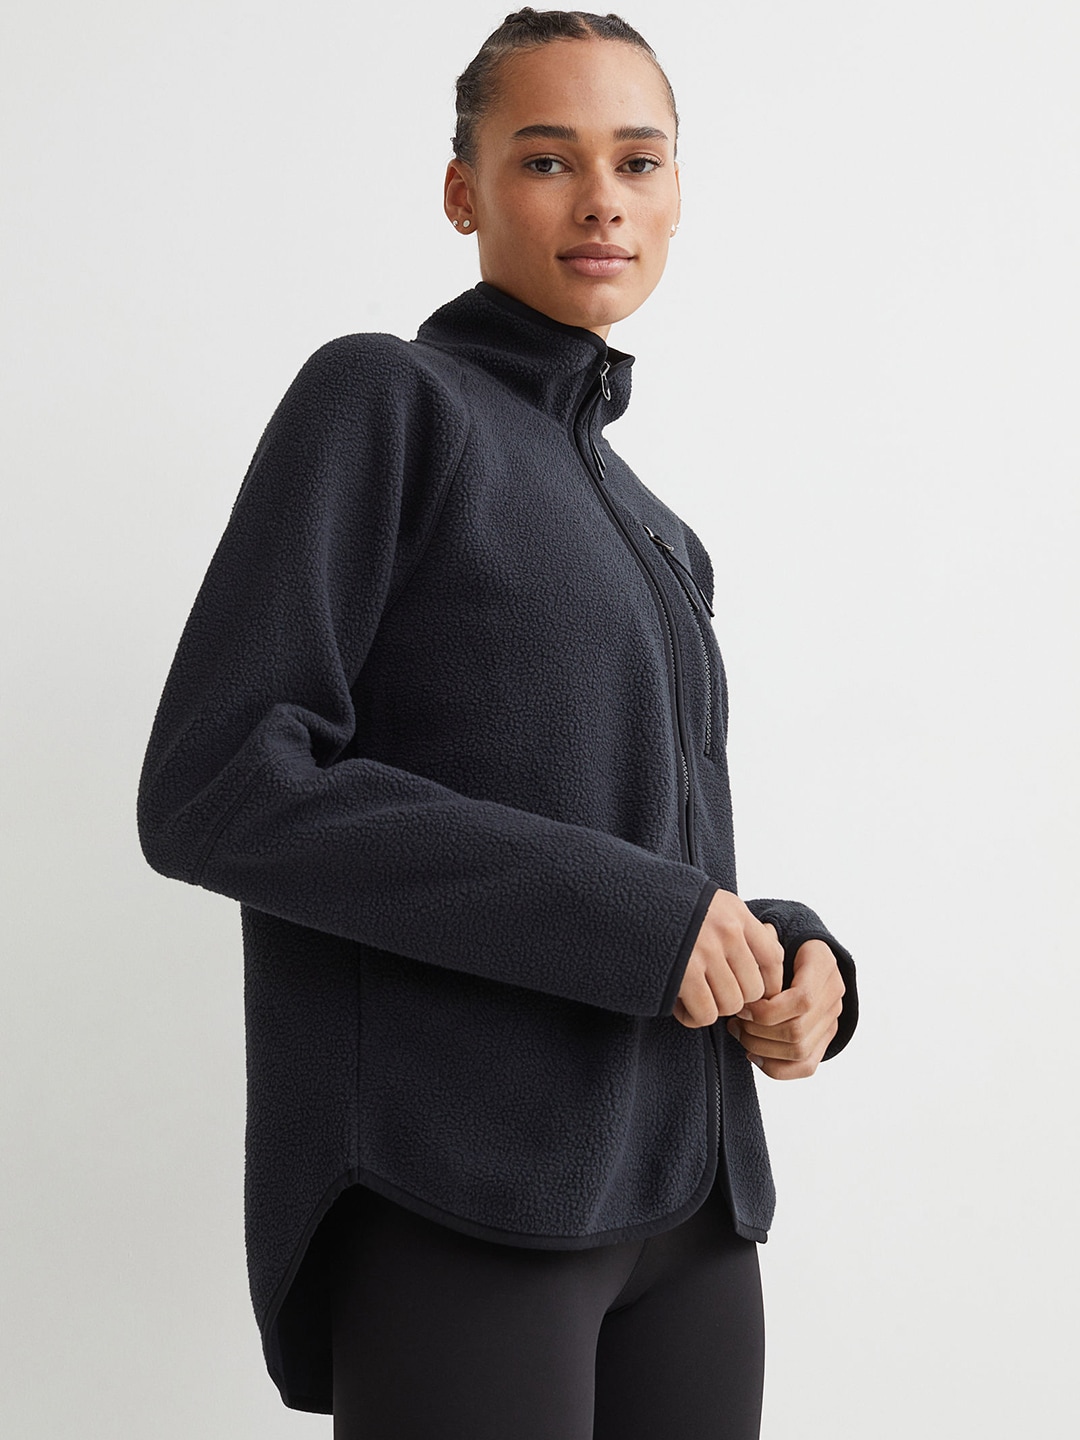 H&M Women Black Solid Teddy Track Jacket Price in India